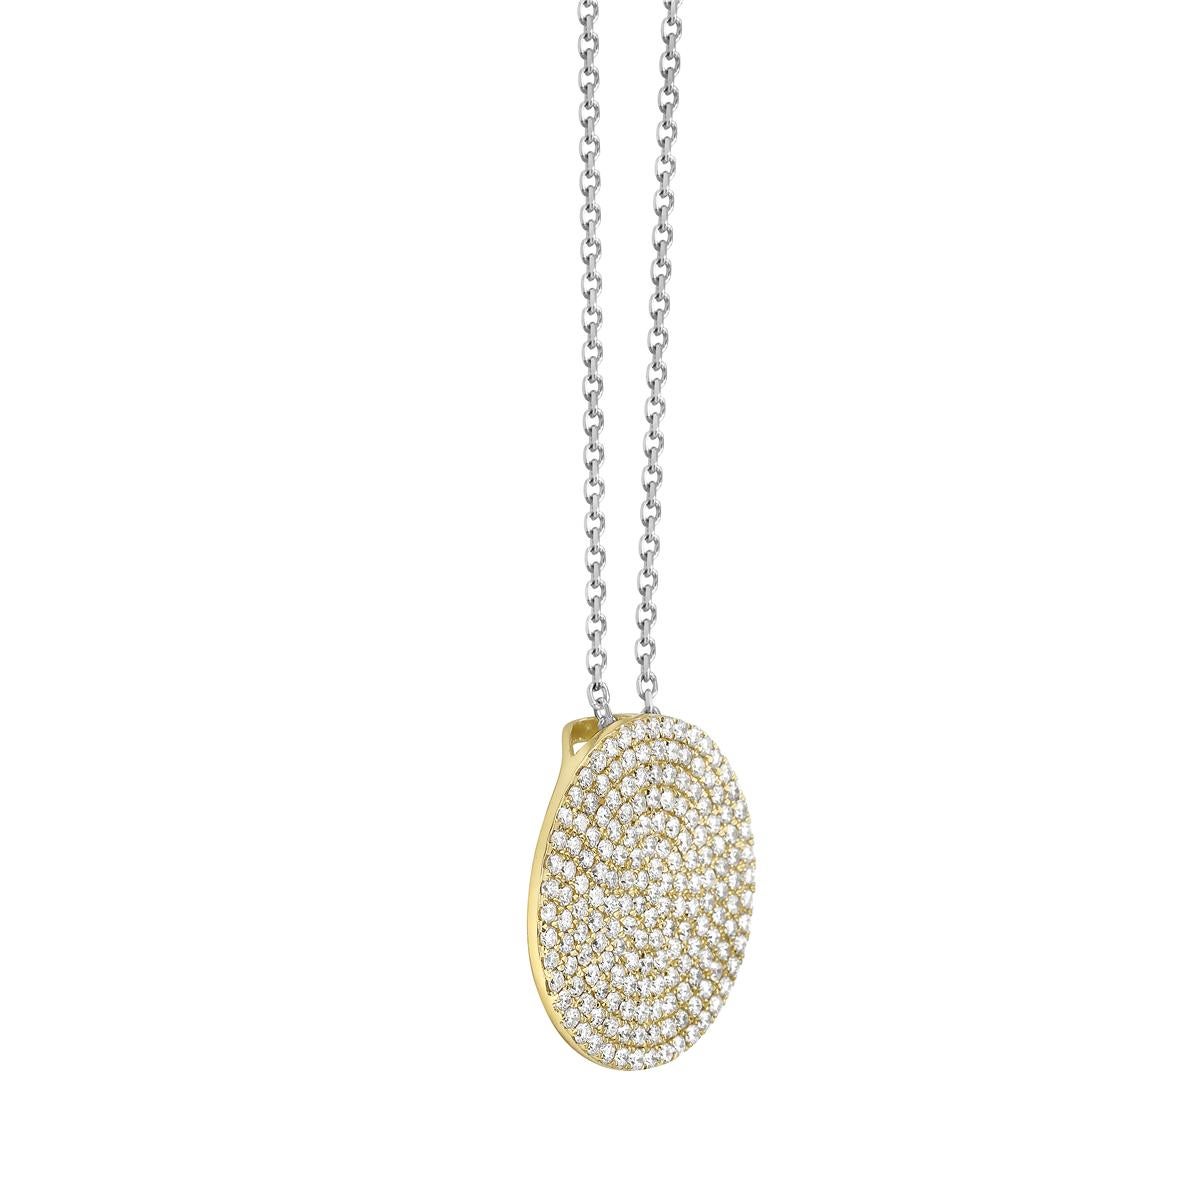 With this exquisite yellow gold circle diamond pendant, style and glamour are in the spotlight. This 14 karat pendant is made from 3.5 grams of gold, with a total of 174 diamonds totaling 1.00 carats, all in SI1-SI2, GH color. A 14 karat 18 inch